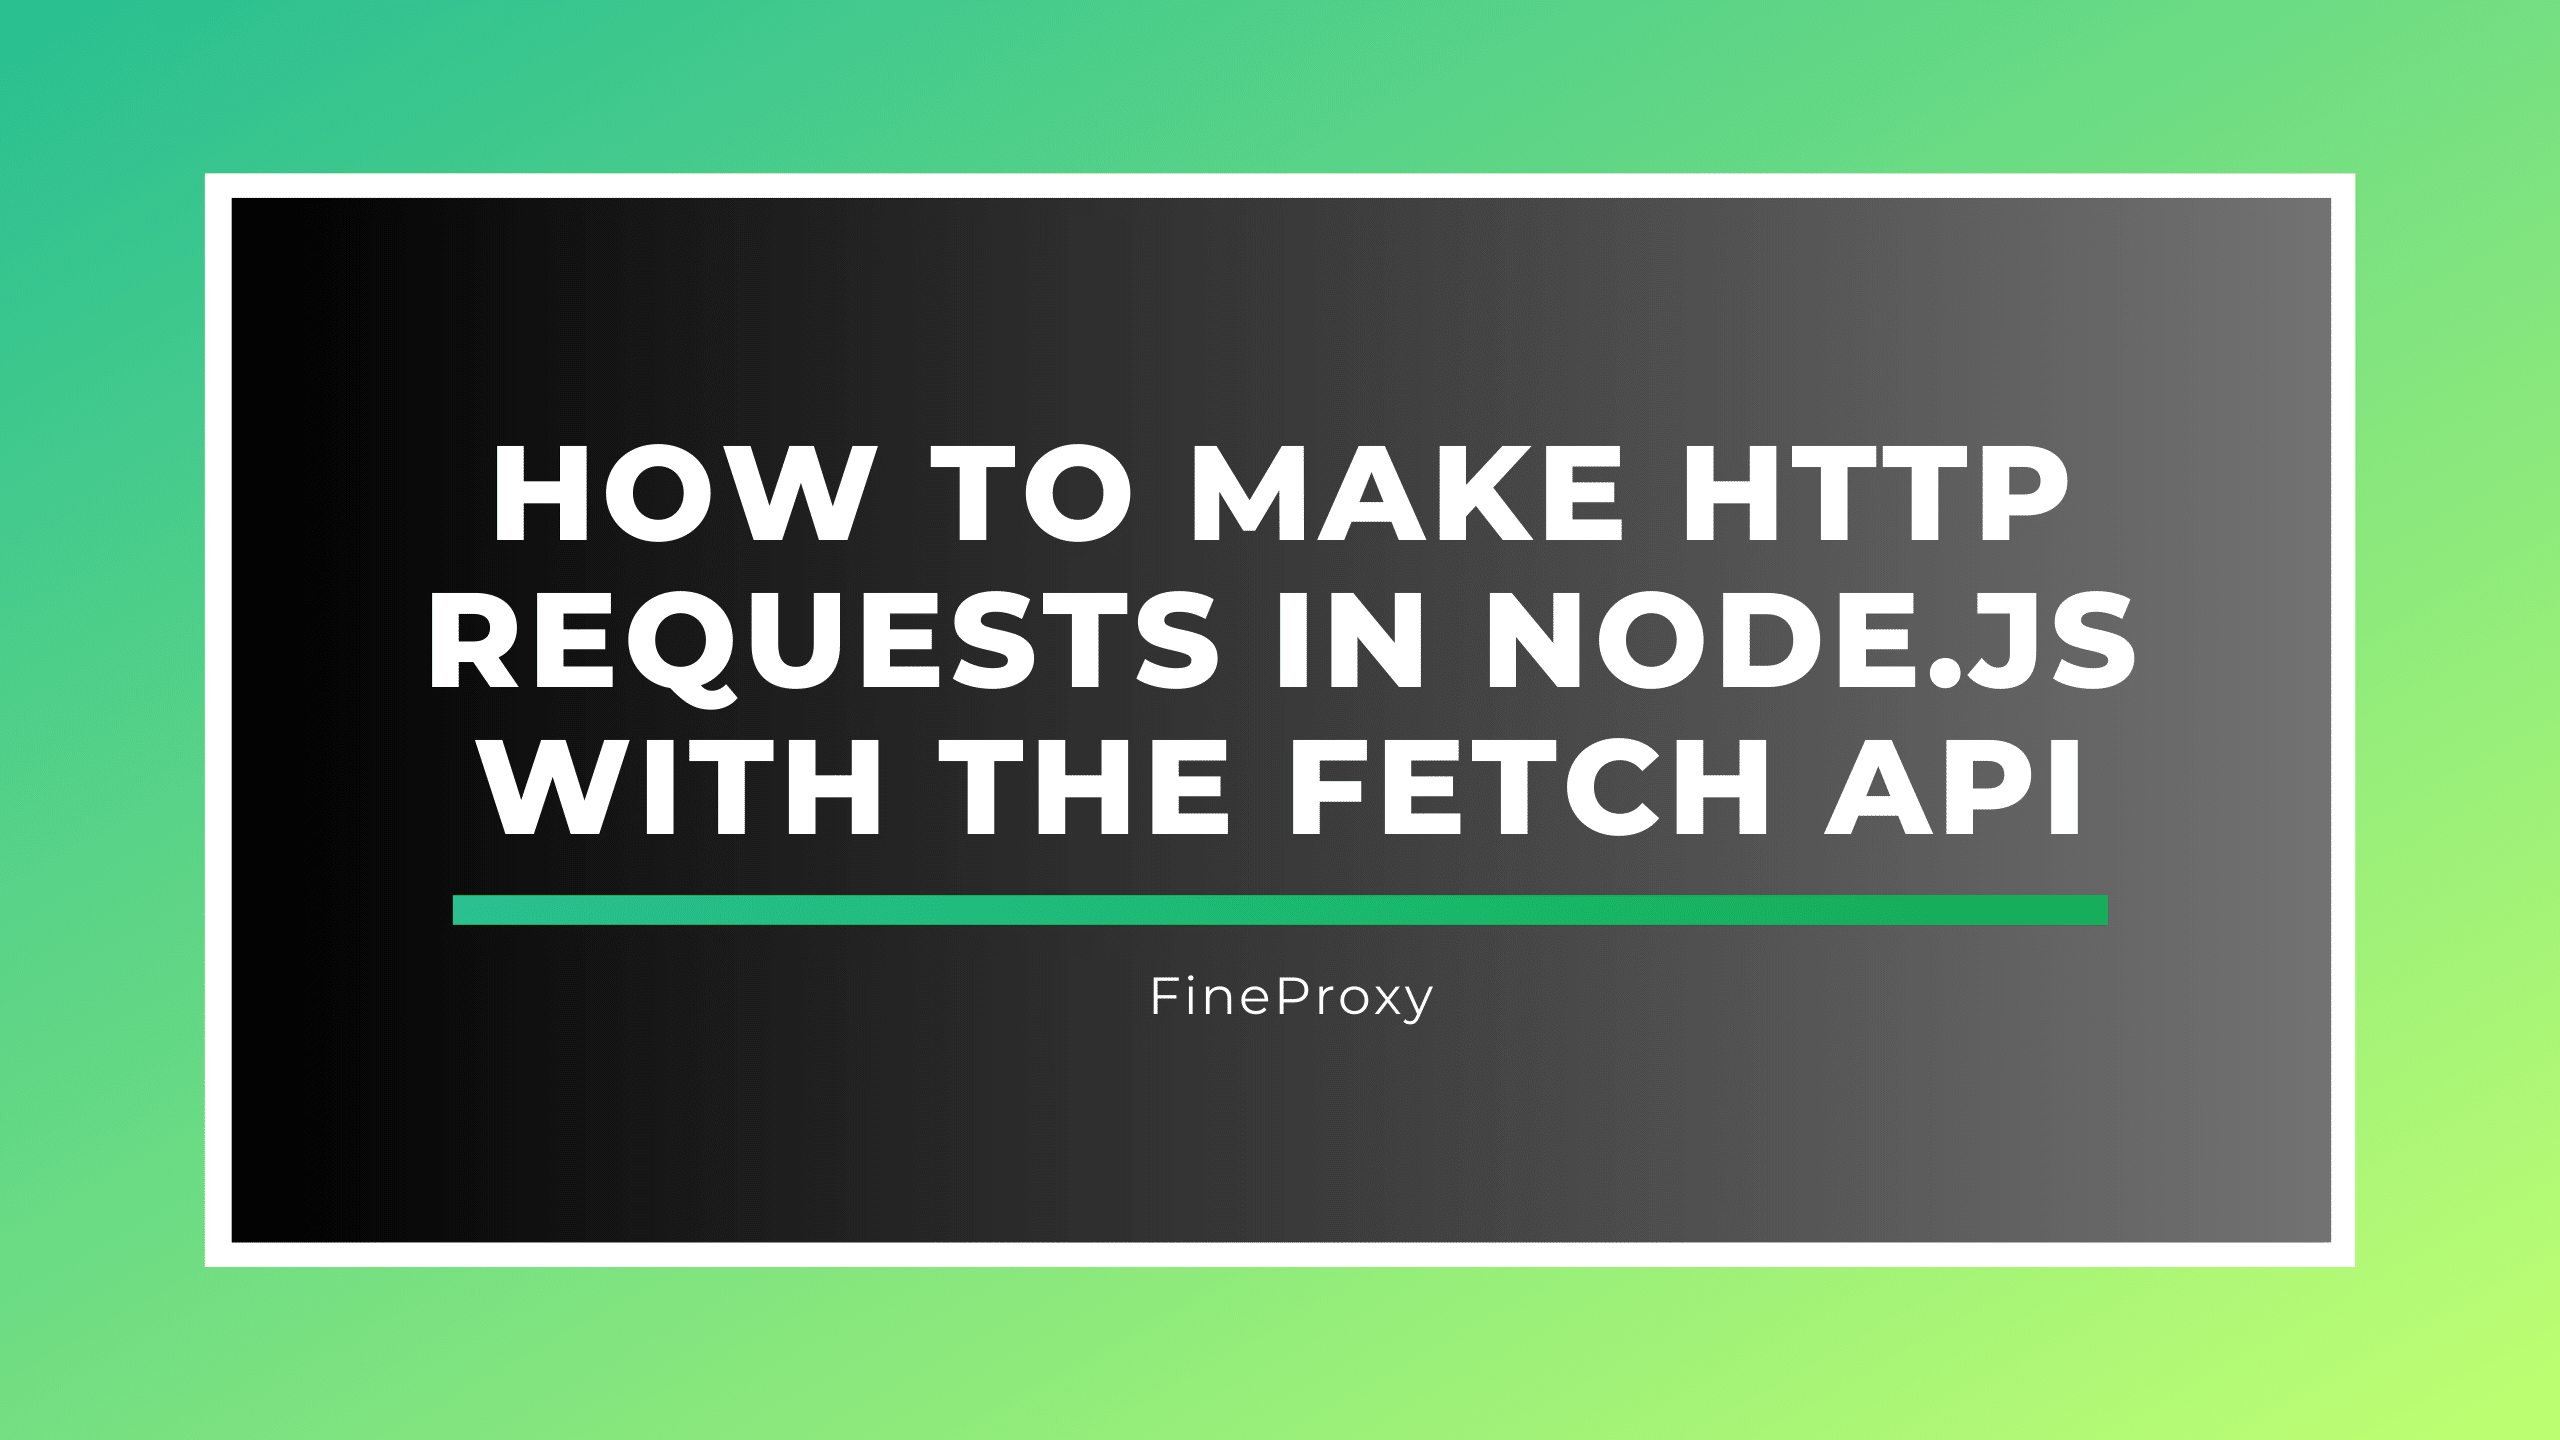 How to Make HTTP Requests in Node.js With the Fetch API